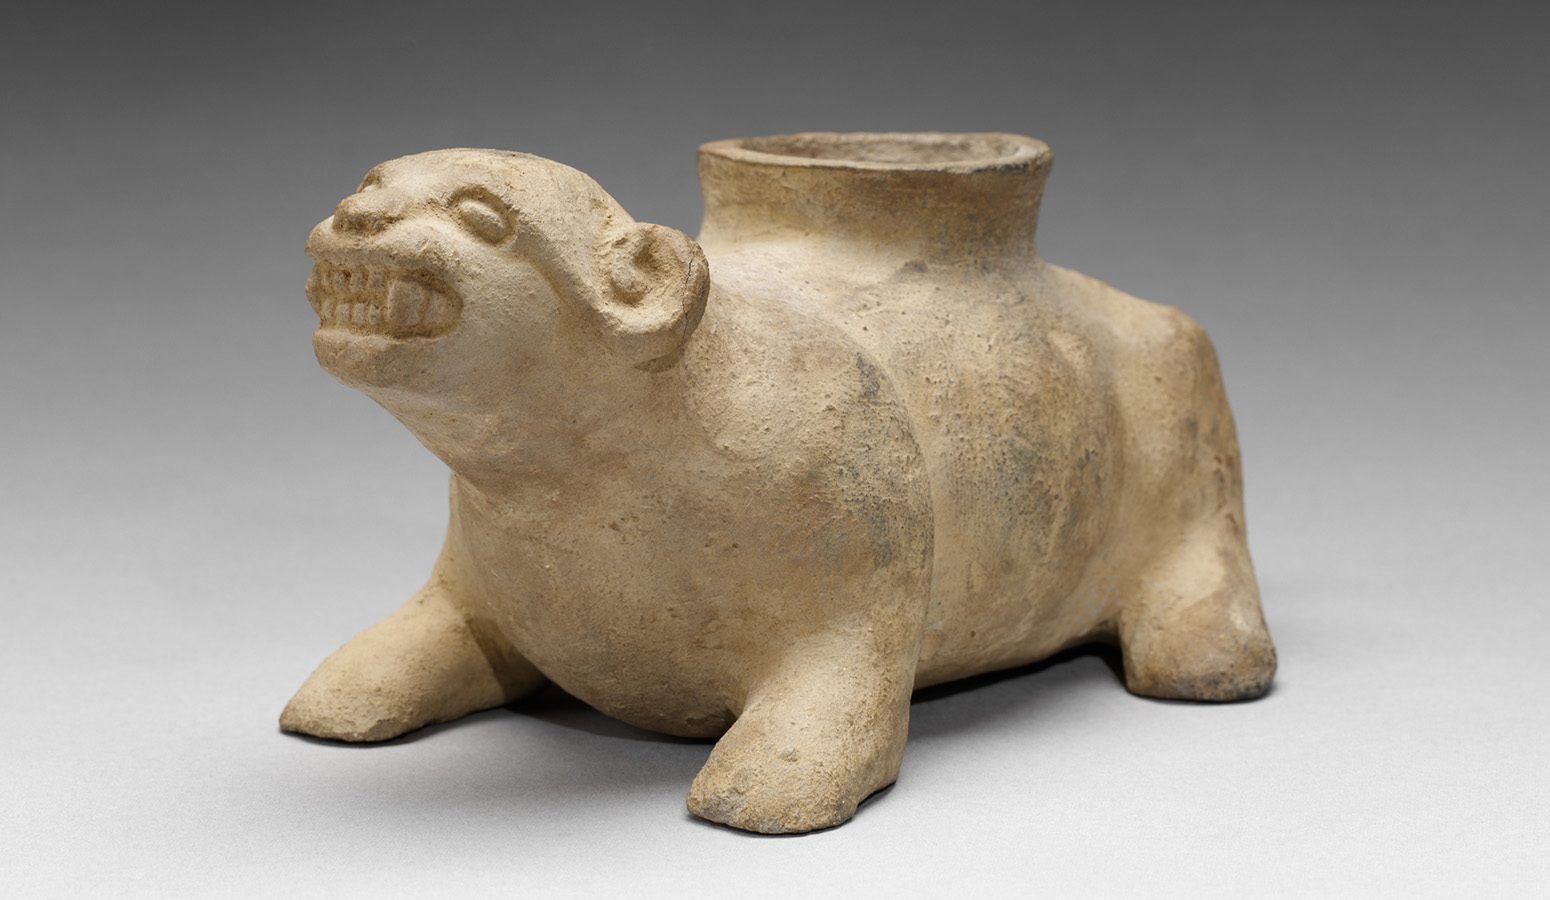 A clay sculpture of a snarling animal on all four legs with a hump on its back